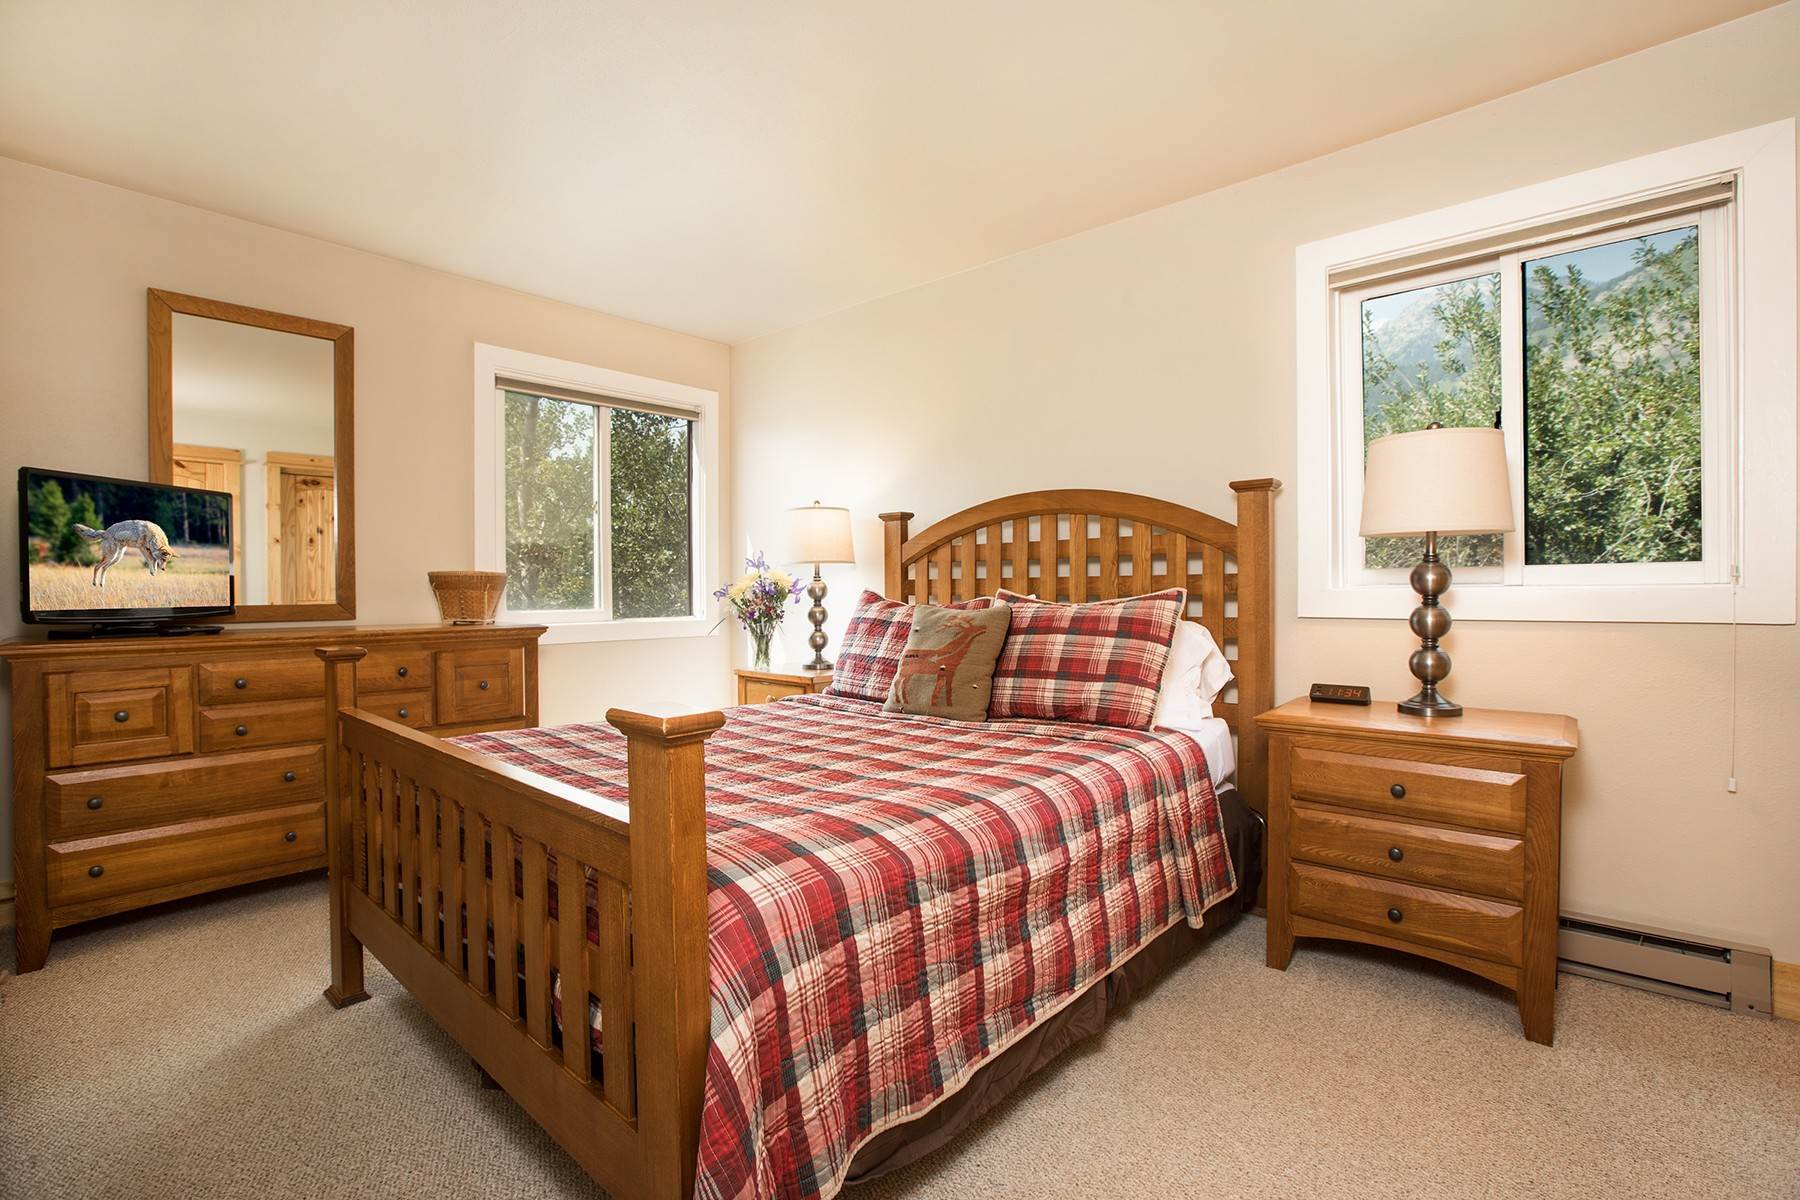 6. Condominiums for Sale at Furnished Teton Village Condominium 3680 W Michael Drive, #W-9-B Teton Village, Wyoming 83025 United States